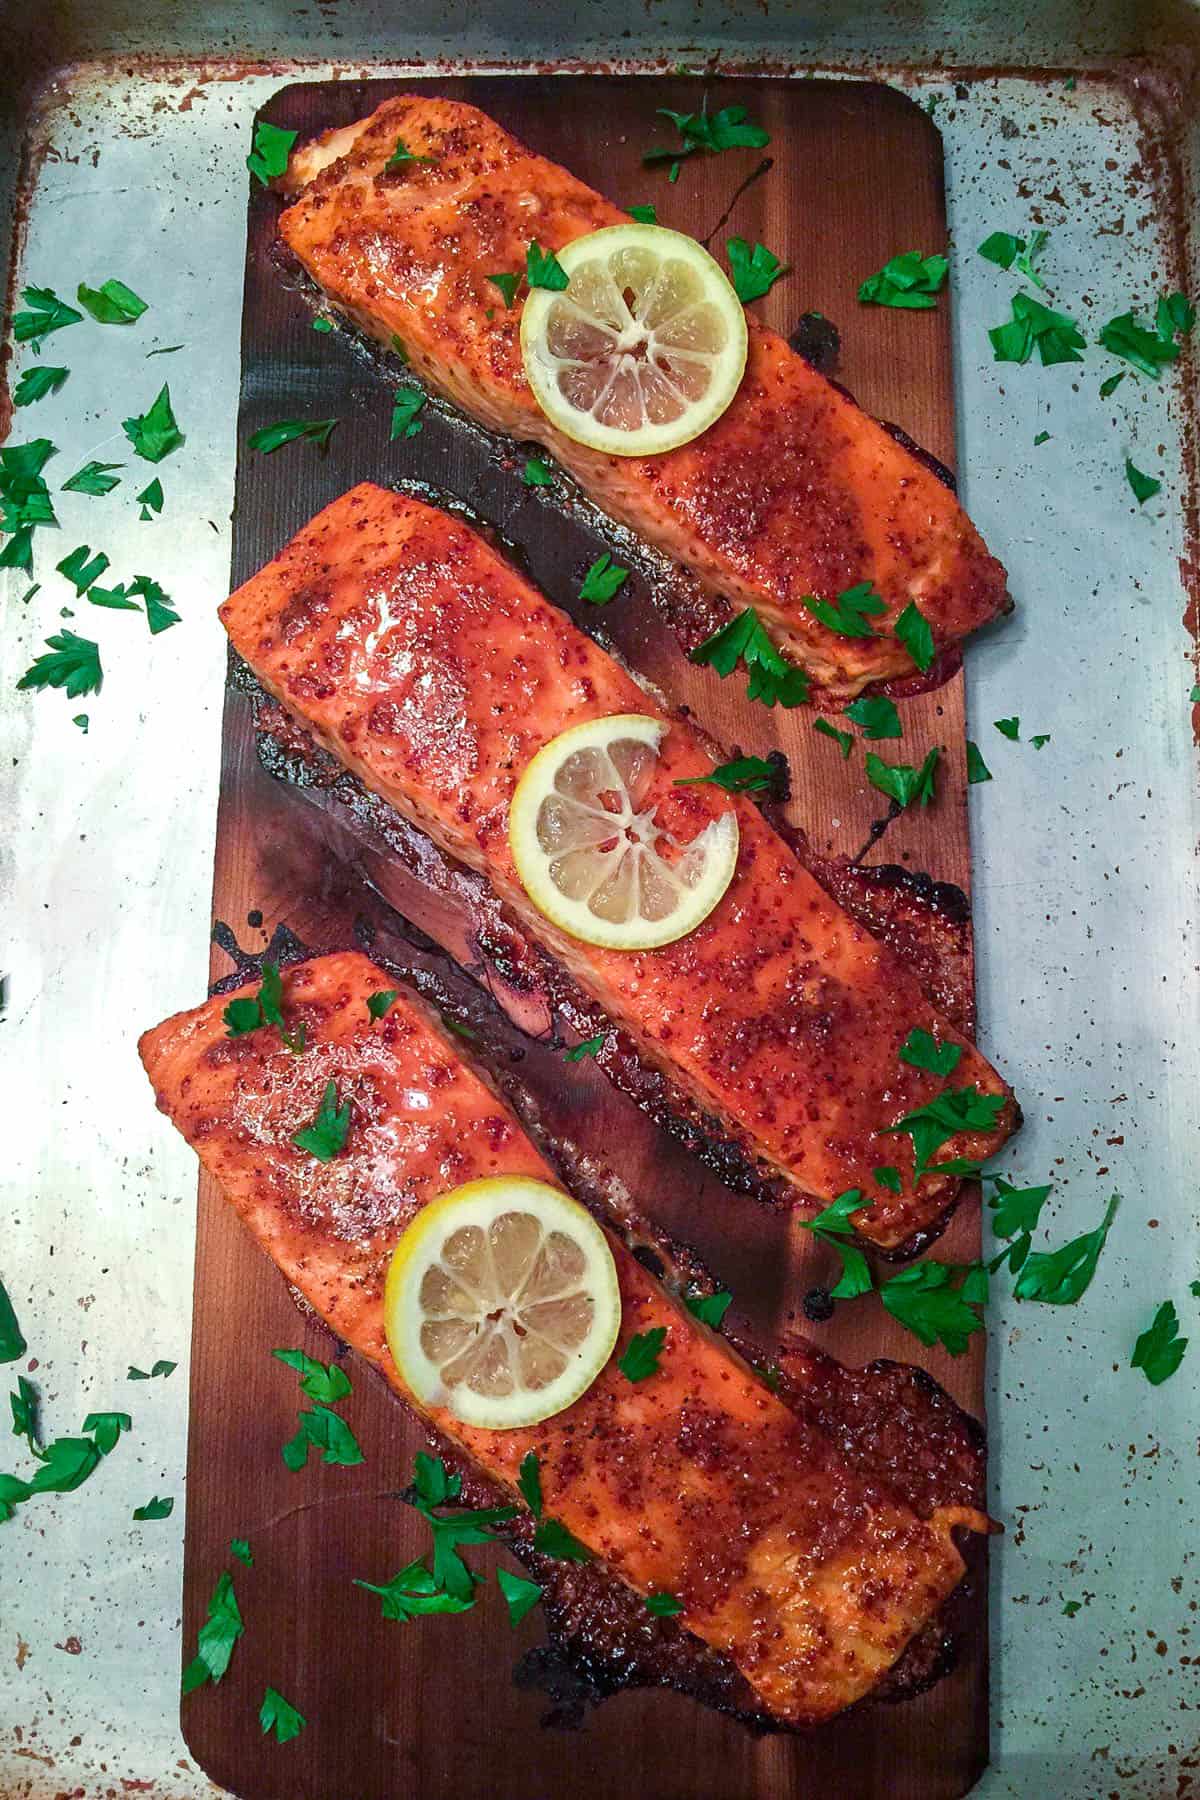 Finished cedar planked salmon garnished with lemon slices and chopped parsley.